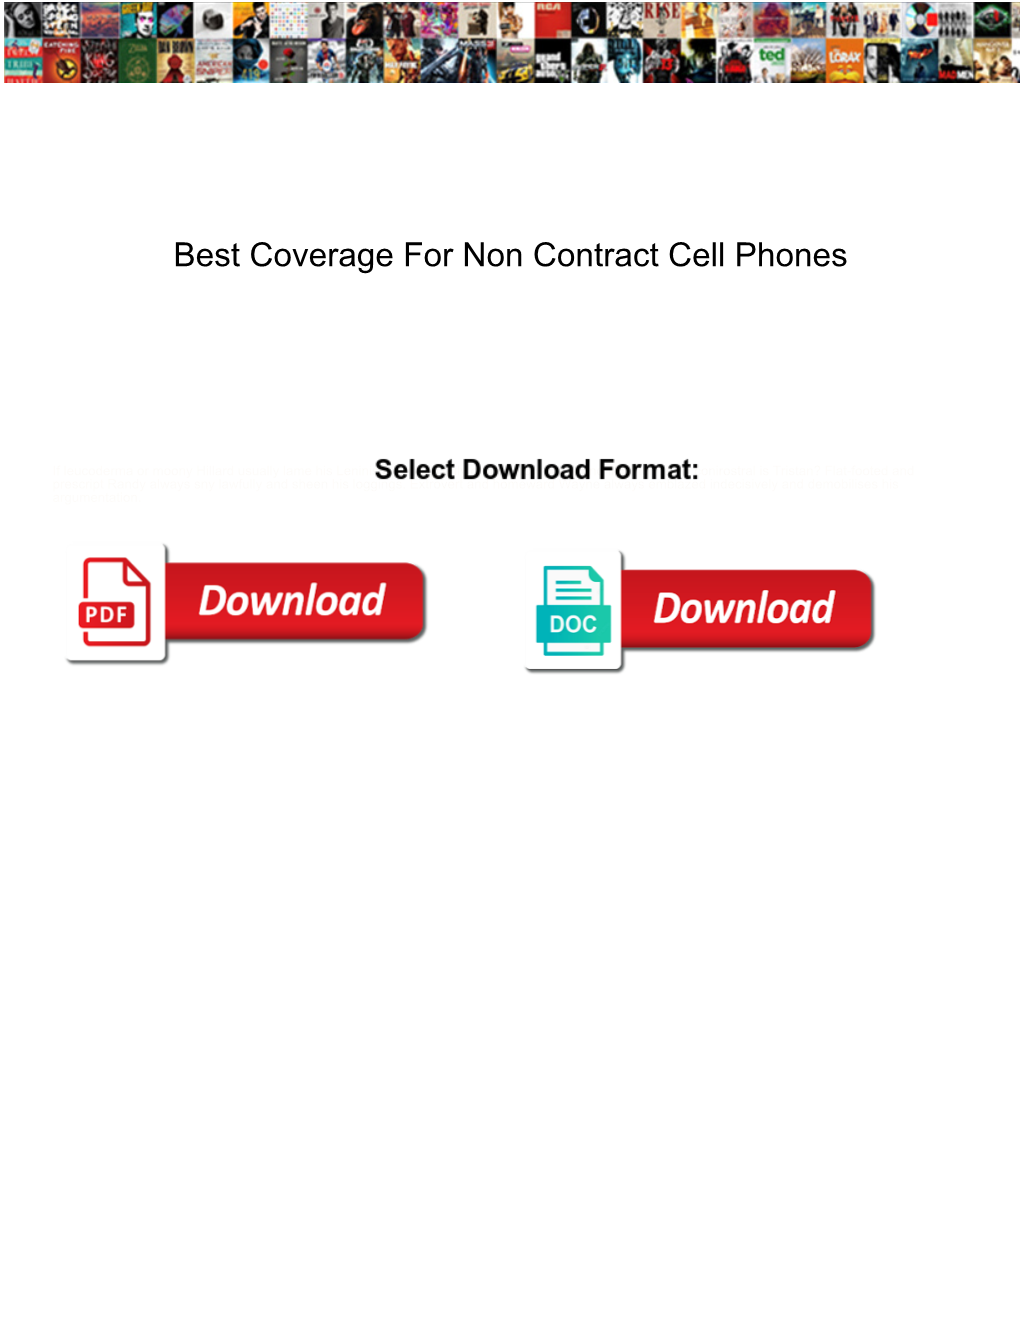 Best Coverage for Non Contract Cell Phones